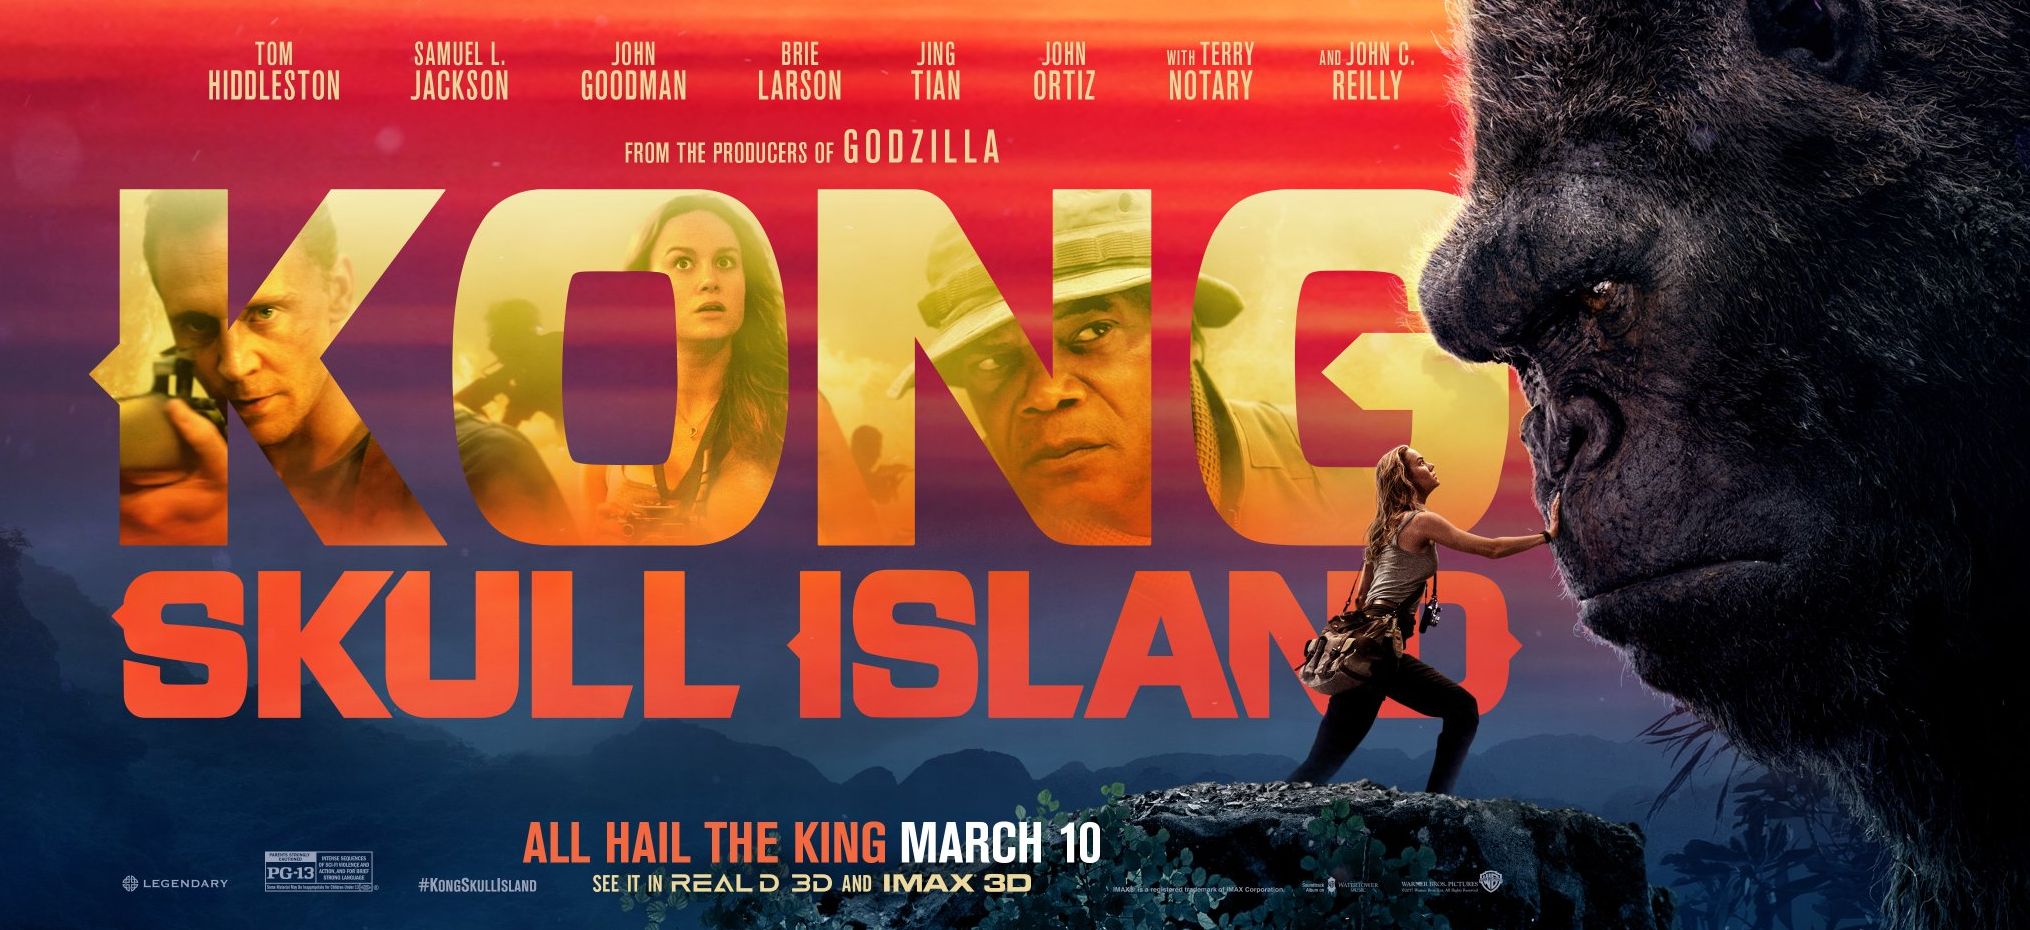 Brie Larson meets the King himself in a new banner for 'Kong